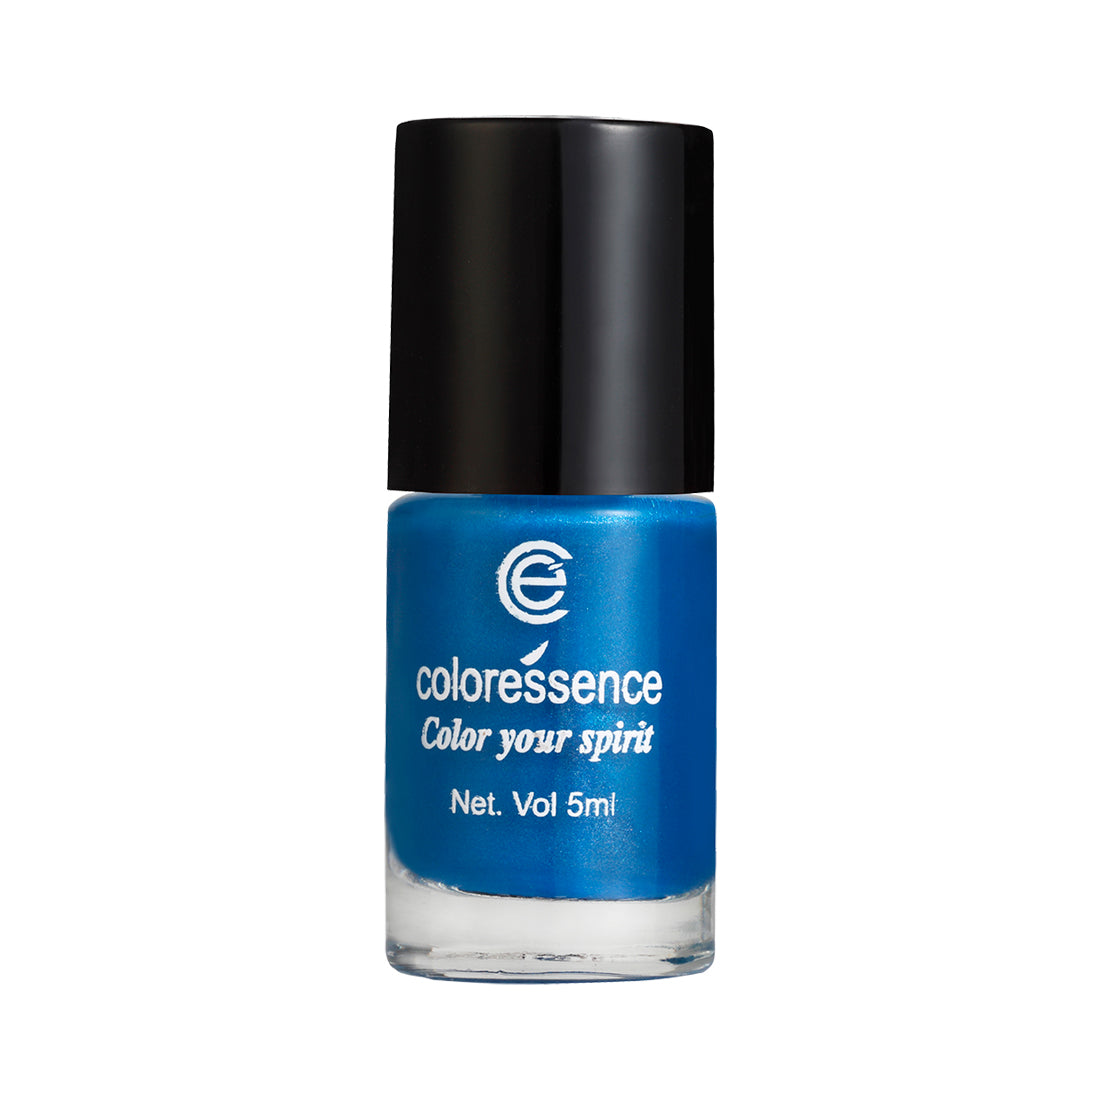 Coloressence Nail Paint Theme For Dream 10 ml Online in India, Buy at Best  Price from Firstcry.com - 10783462